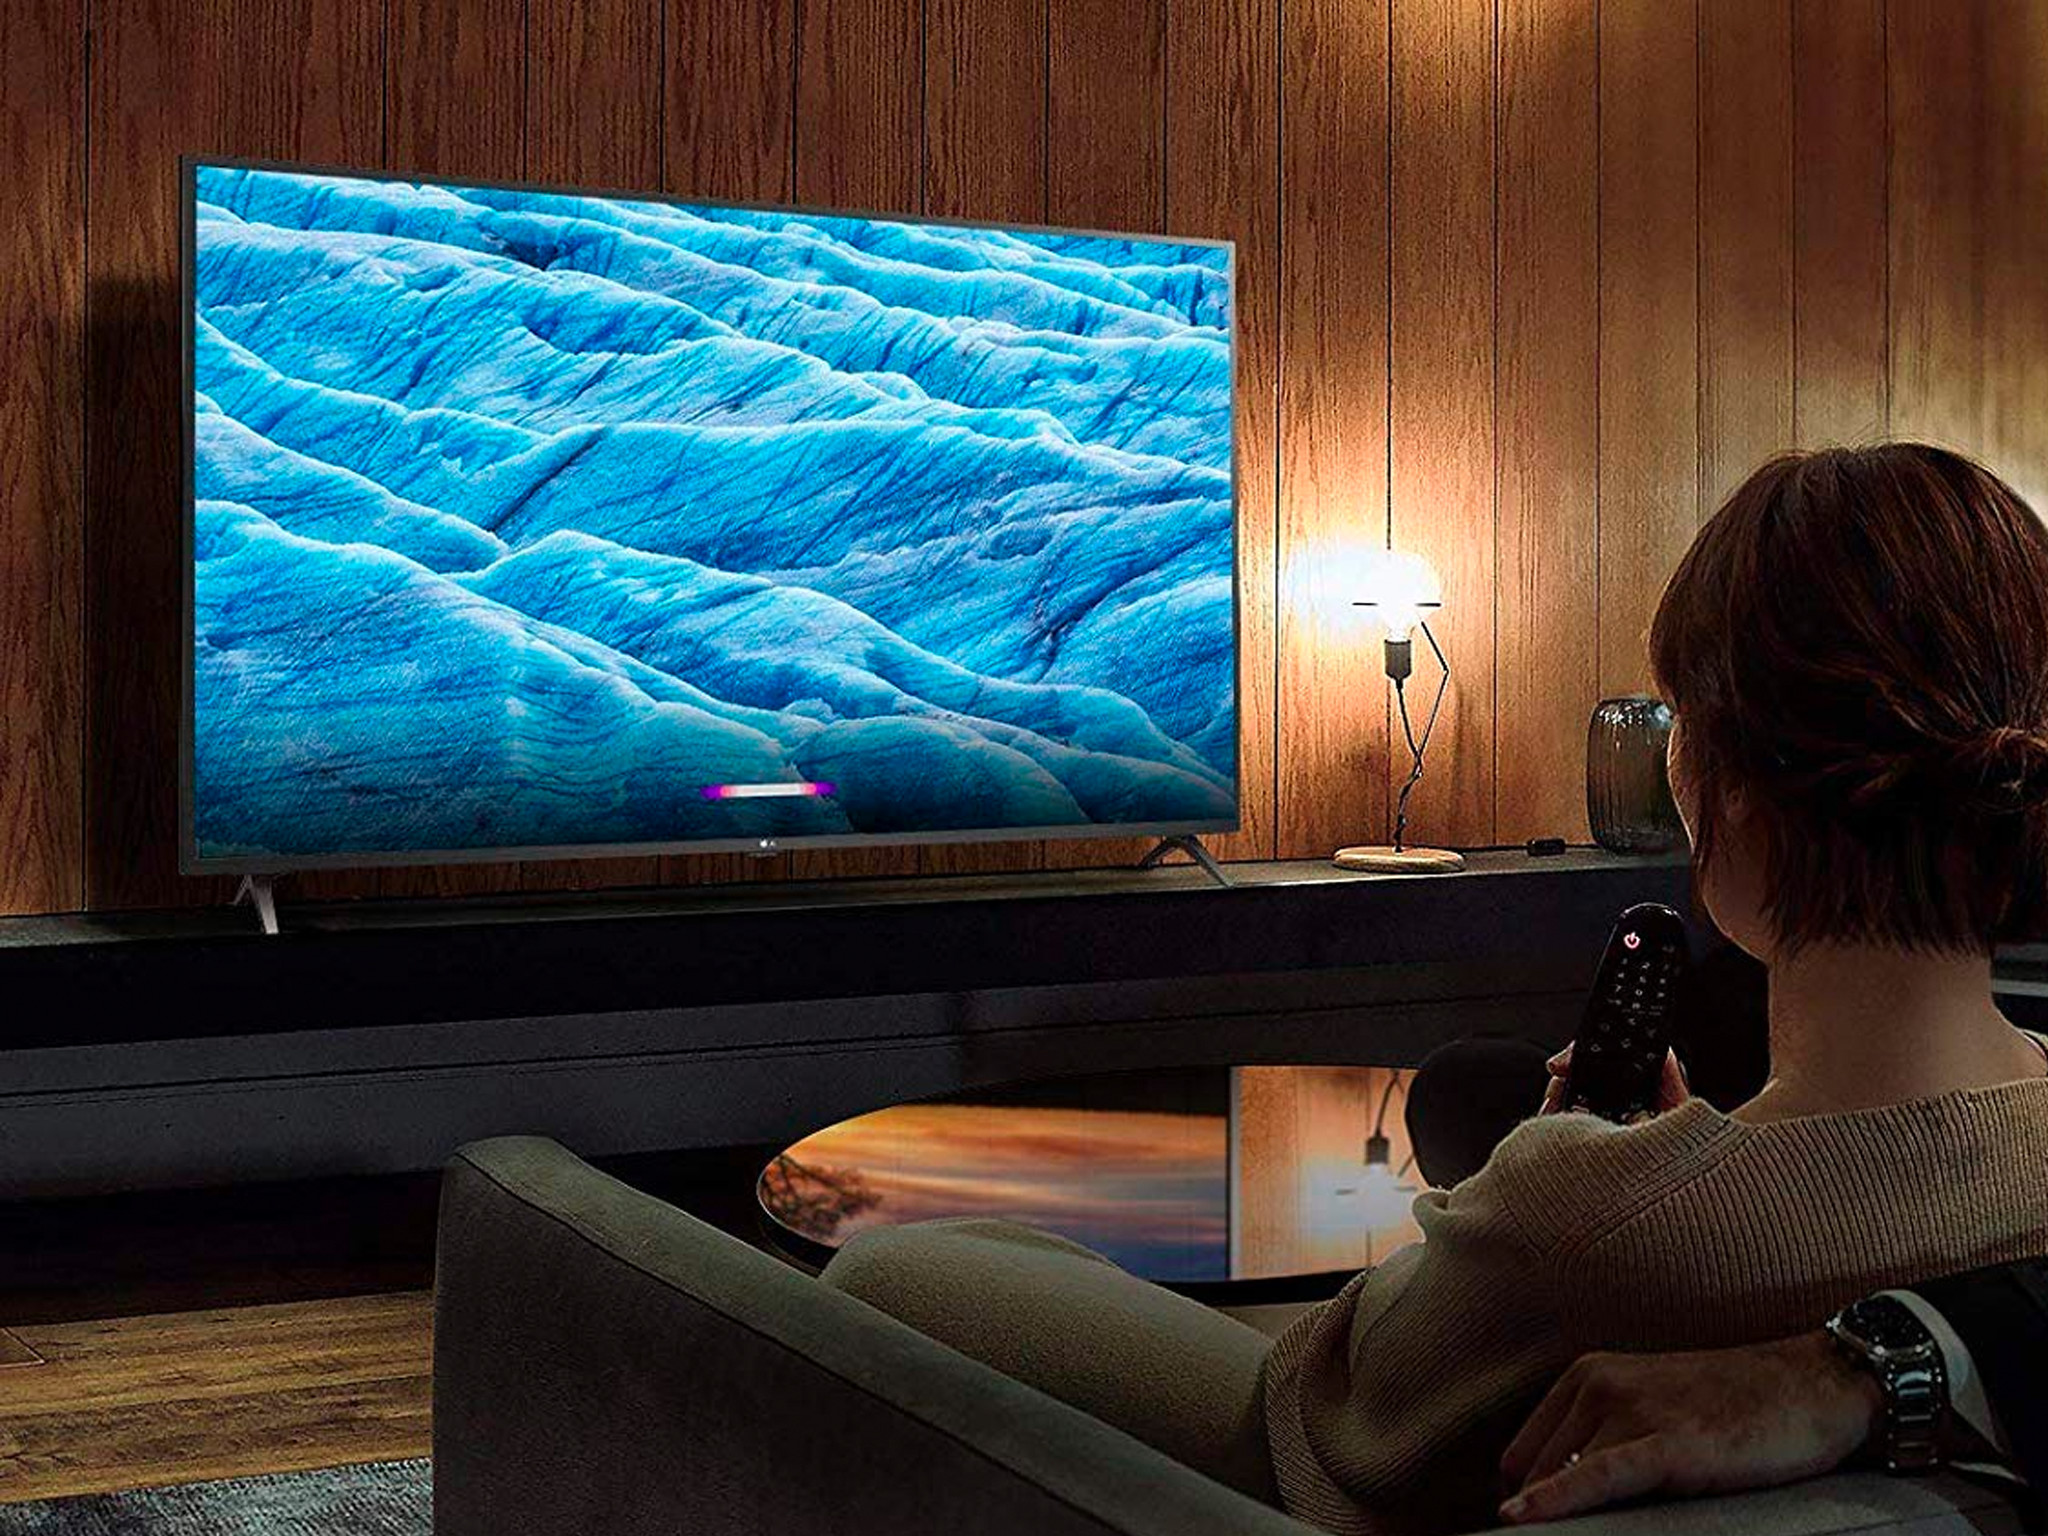 This Black Friday TV deal scores you LG&#39;s 55-inch 4K Smart TV for only $350 via Amazon | iMore